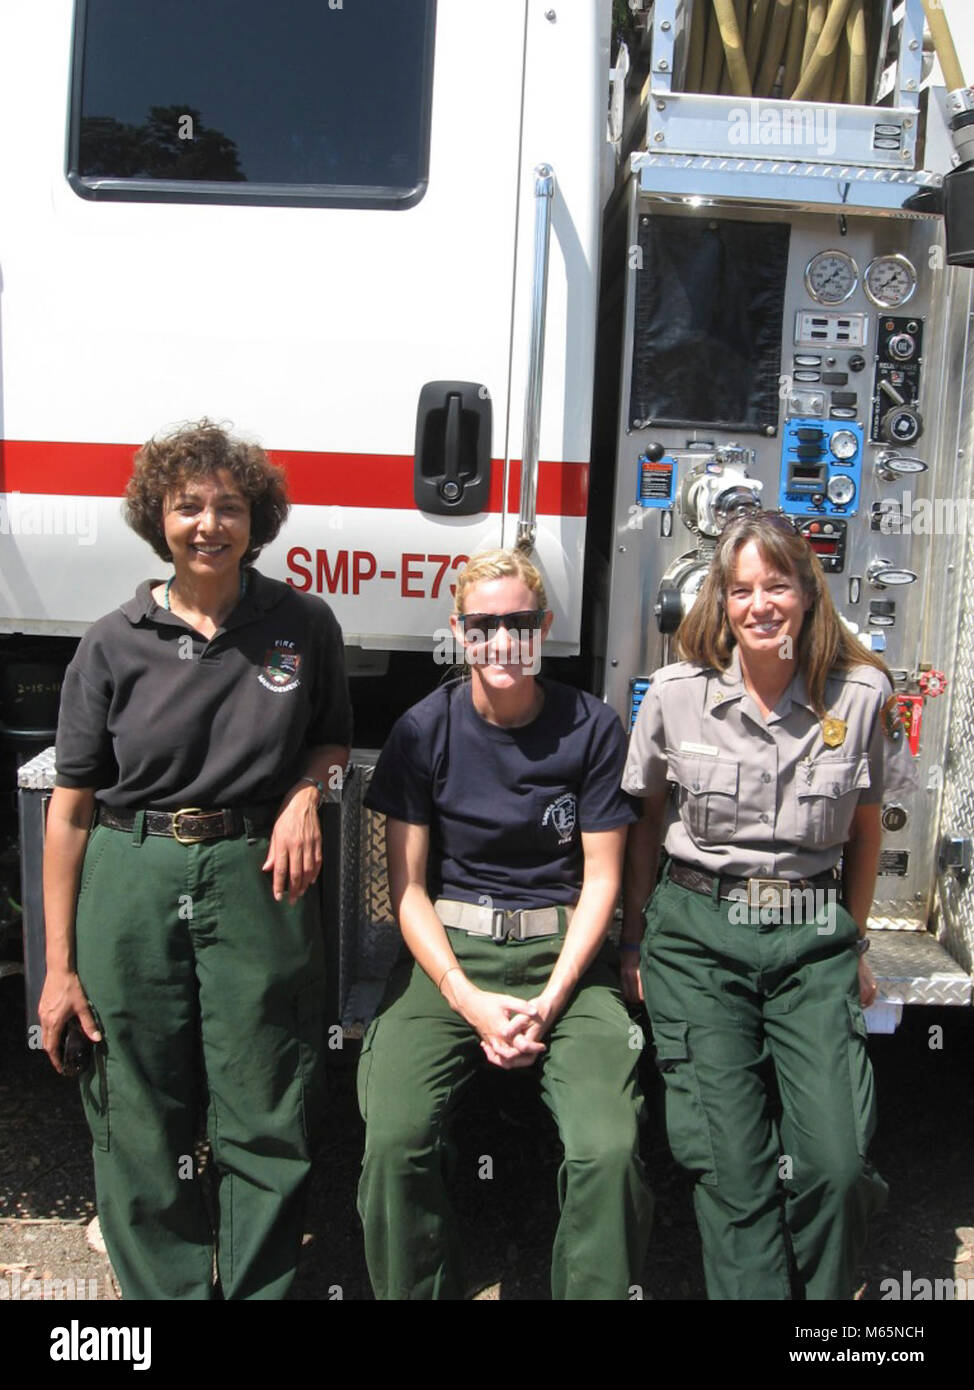 Fire Crew. From L-R: fire program assistant, engine operator, and fire management officer. Stock Photo